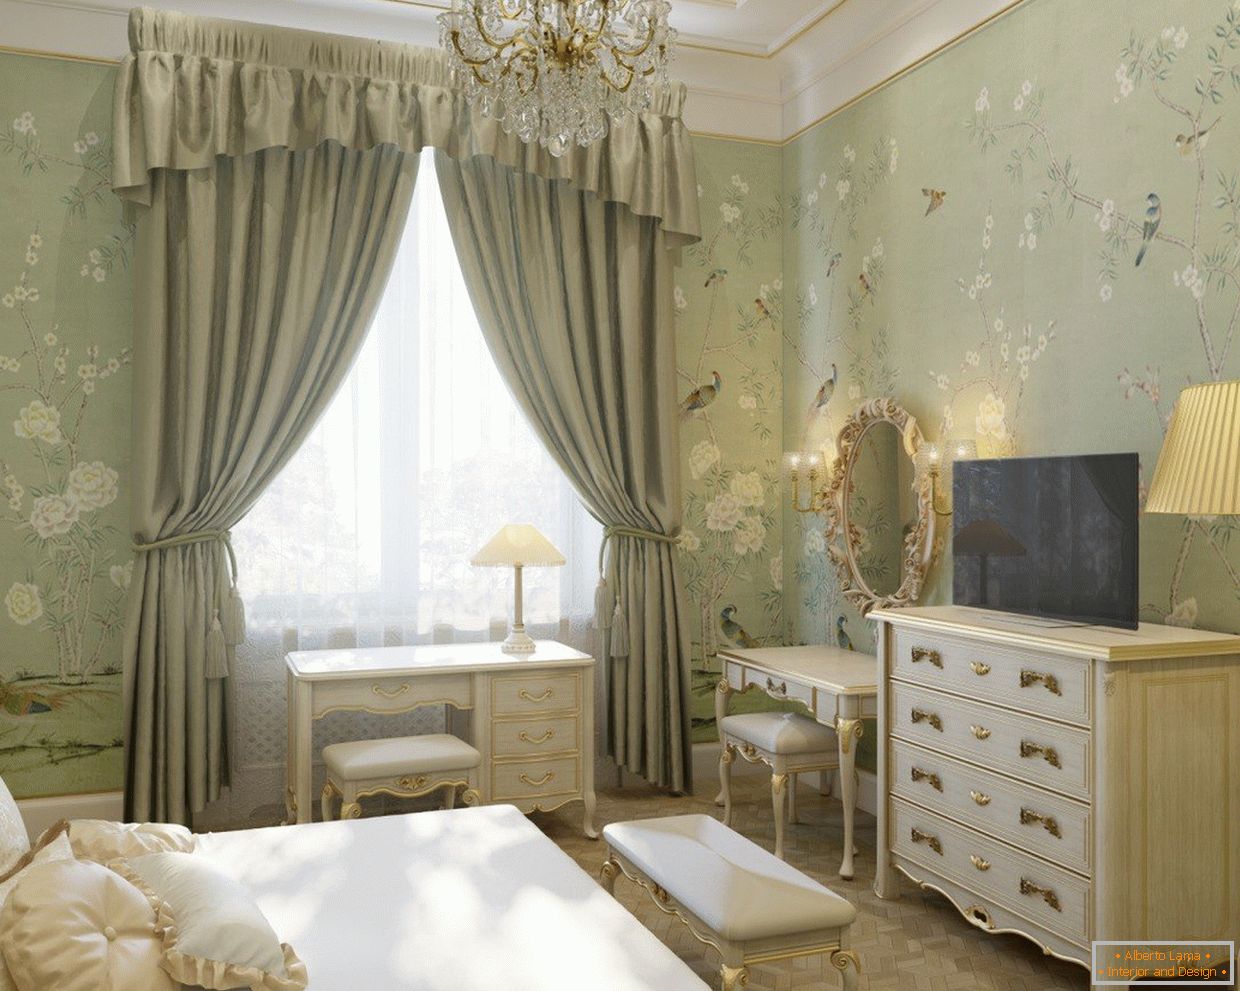 Bedroom - design in classical style